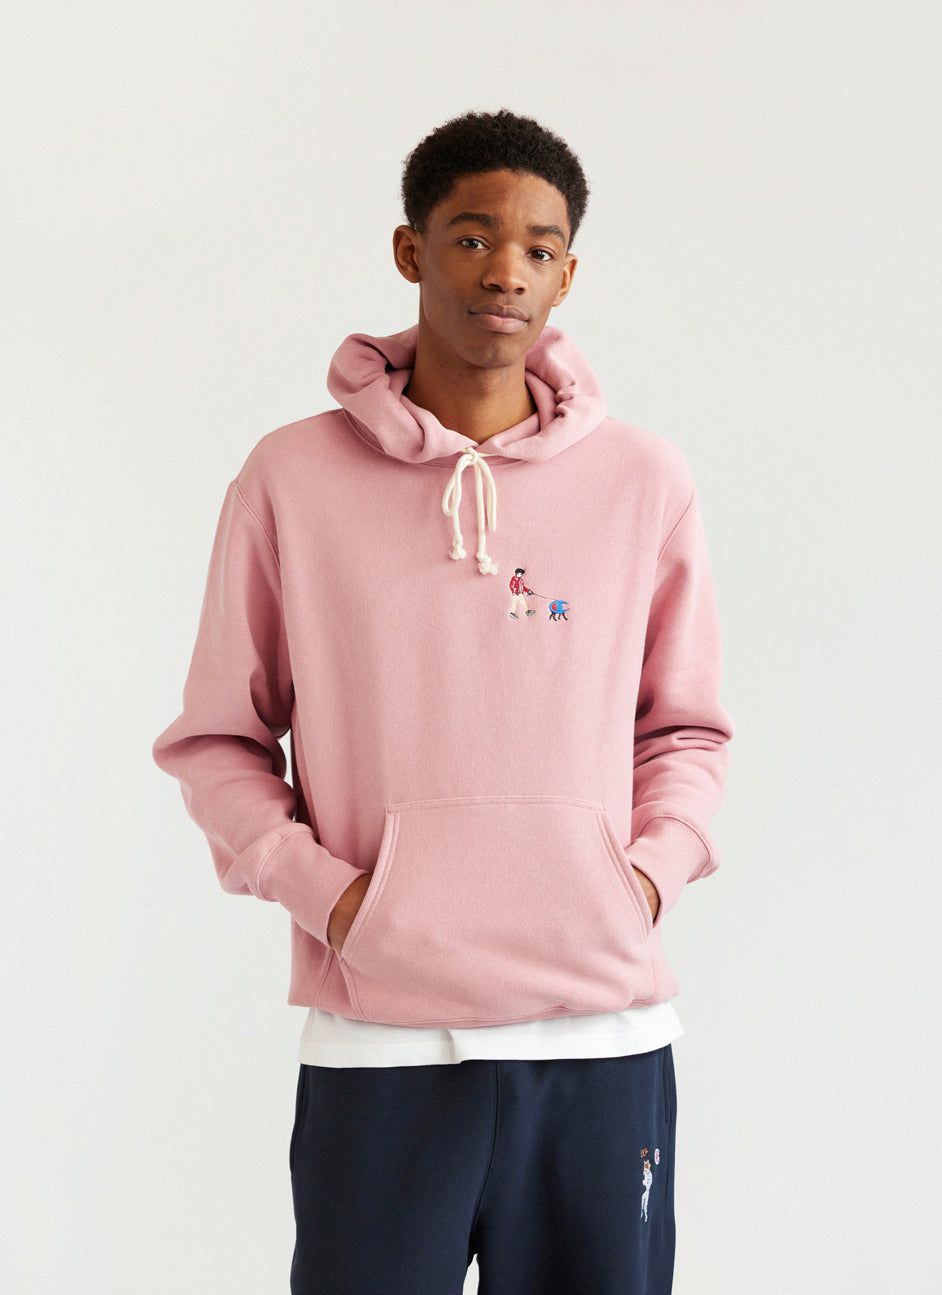 Men's Pink Embroidered Champion Hoodie | Dog Walk & Percival Menswear